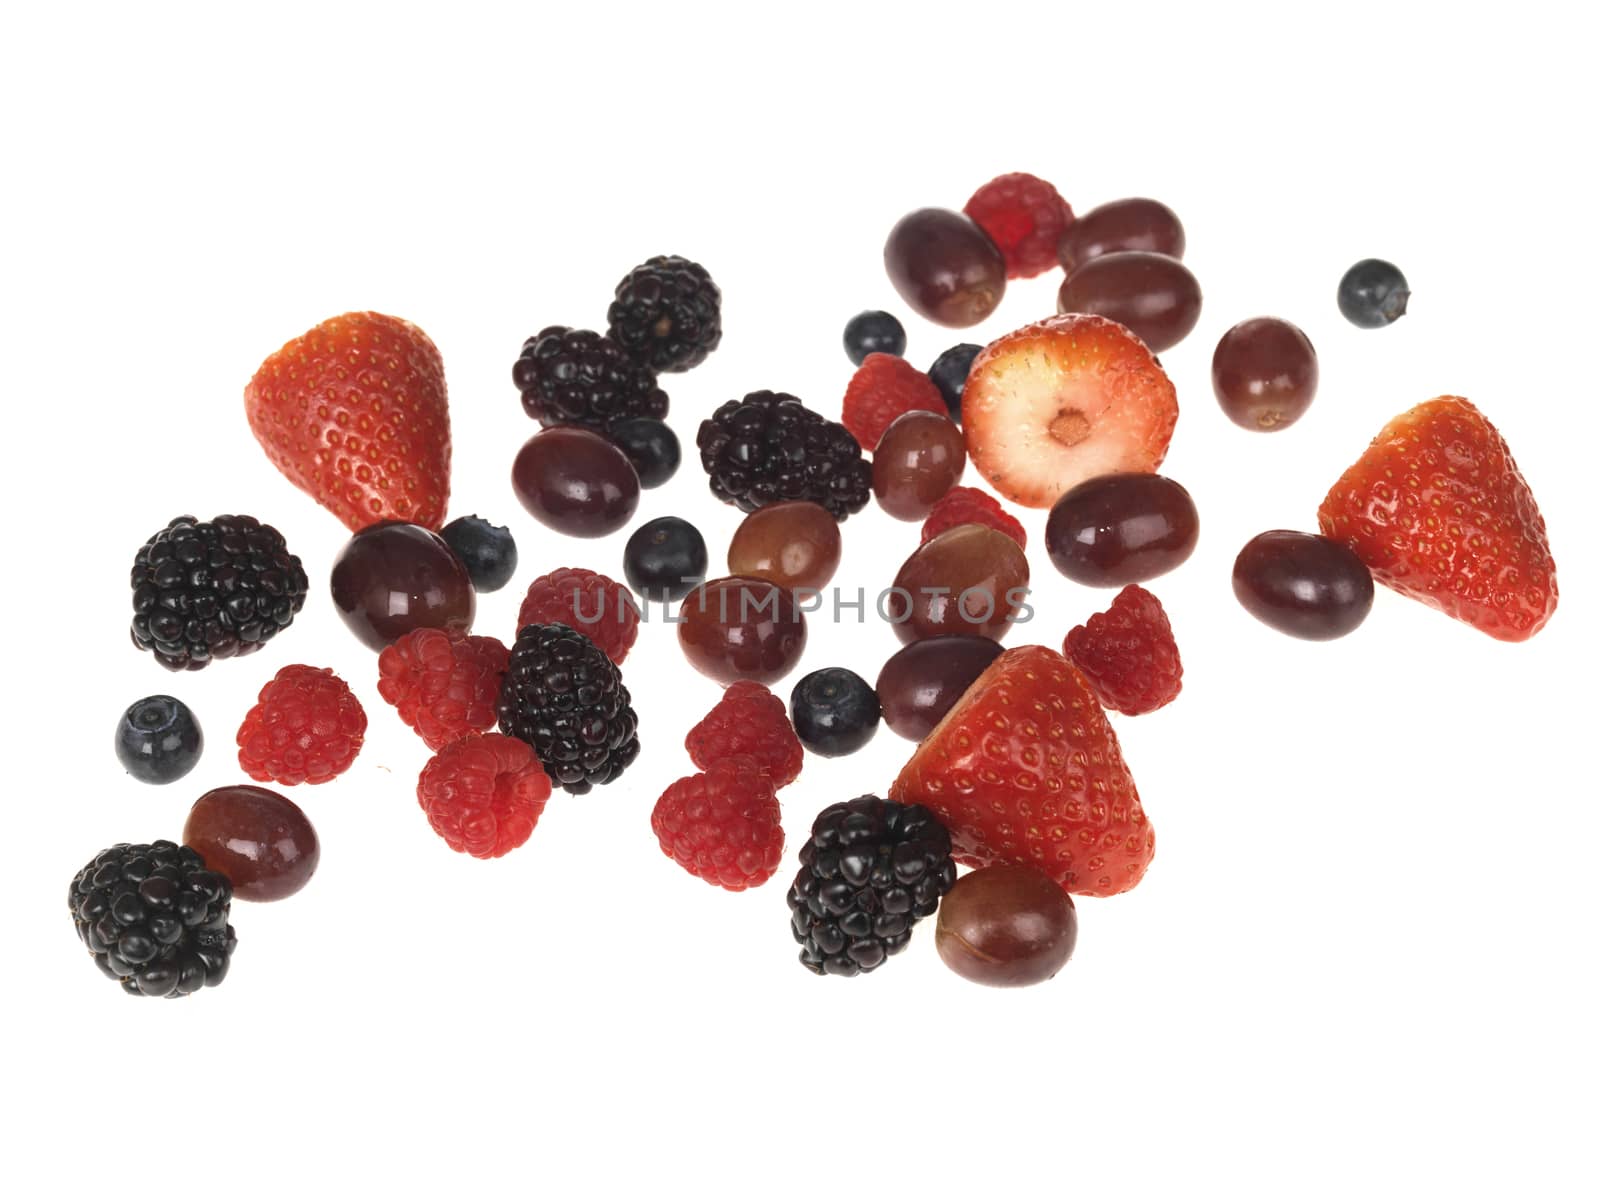 Mixed Fruit Berries by Whiteboxmedia